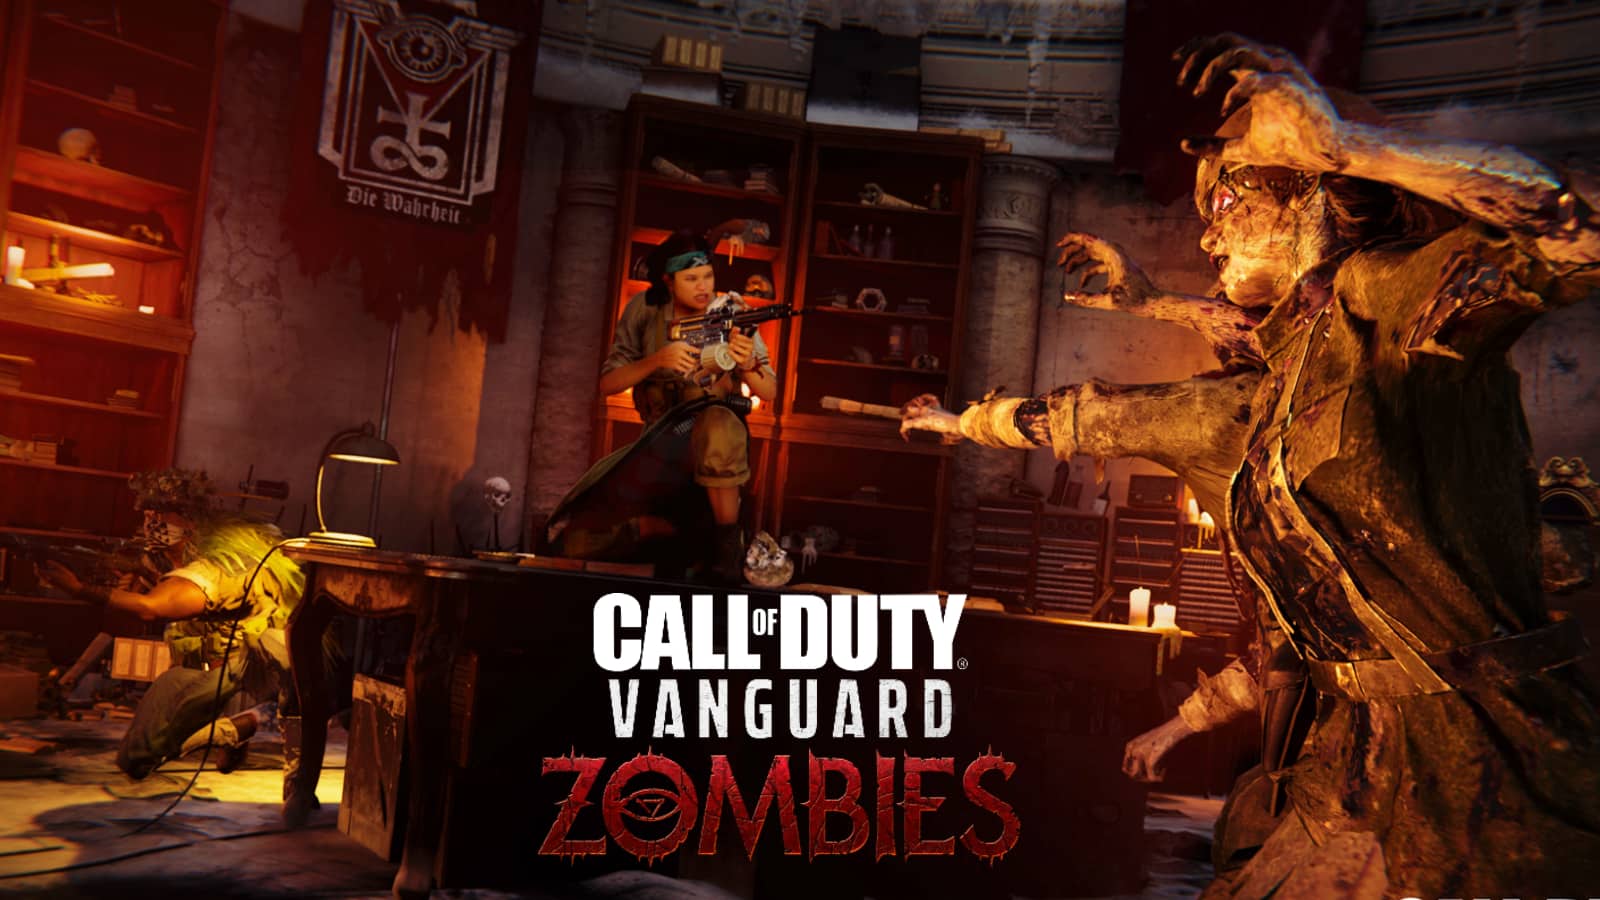 Vanguard Zombies Season 1 patch notes New objective, covenants, area, more